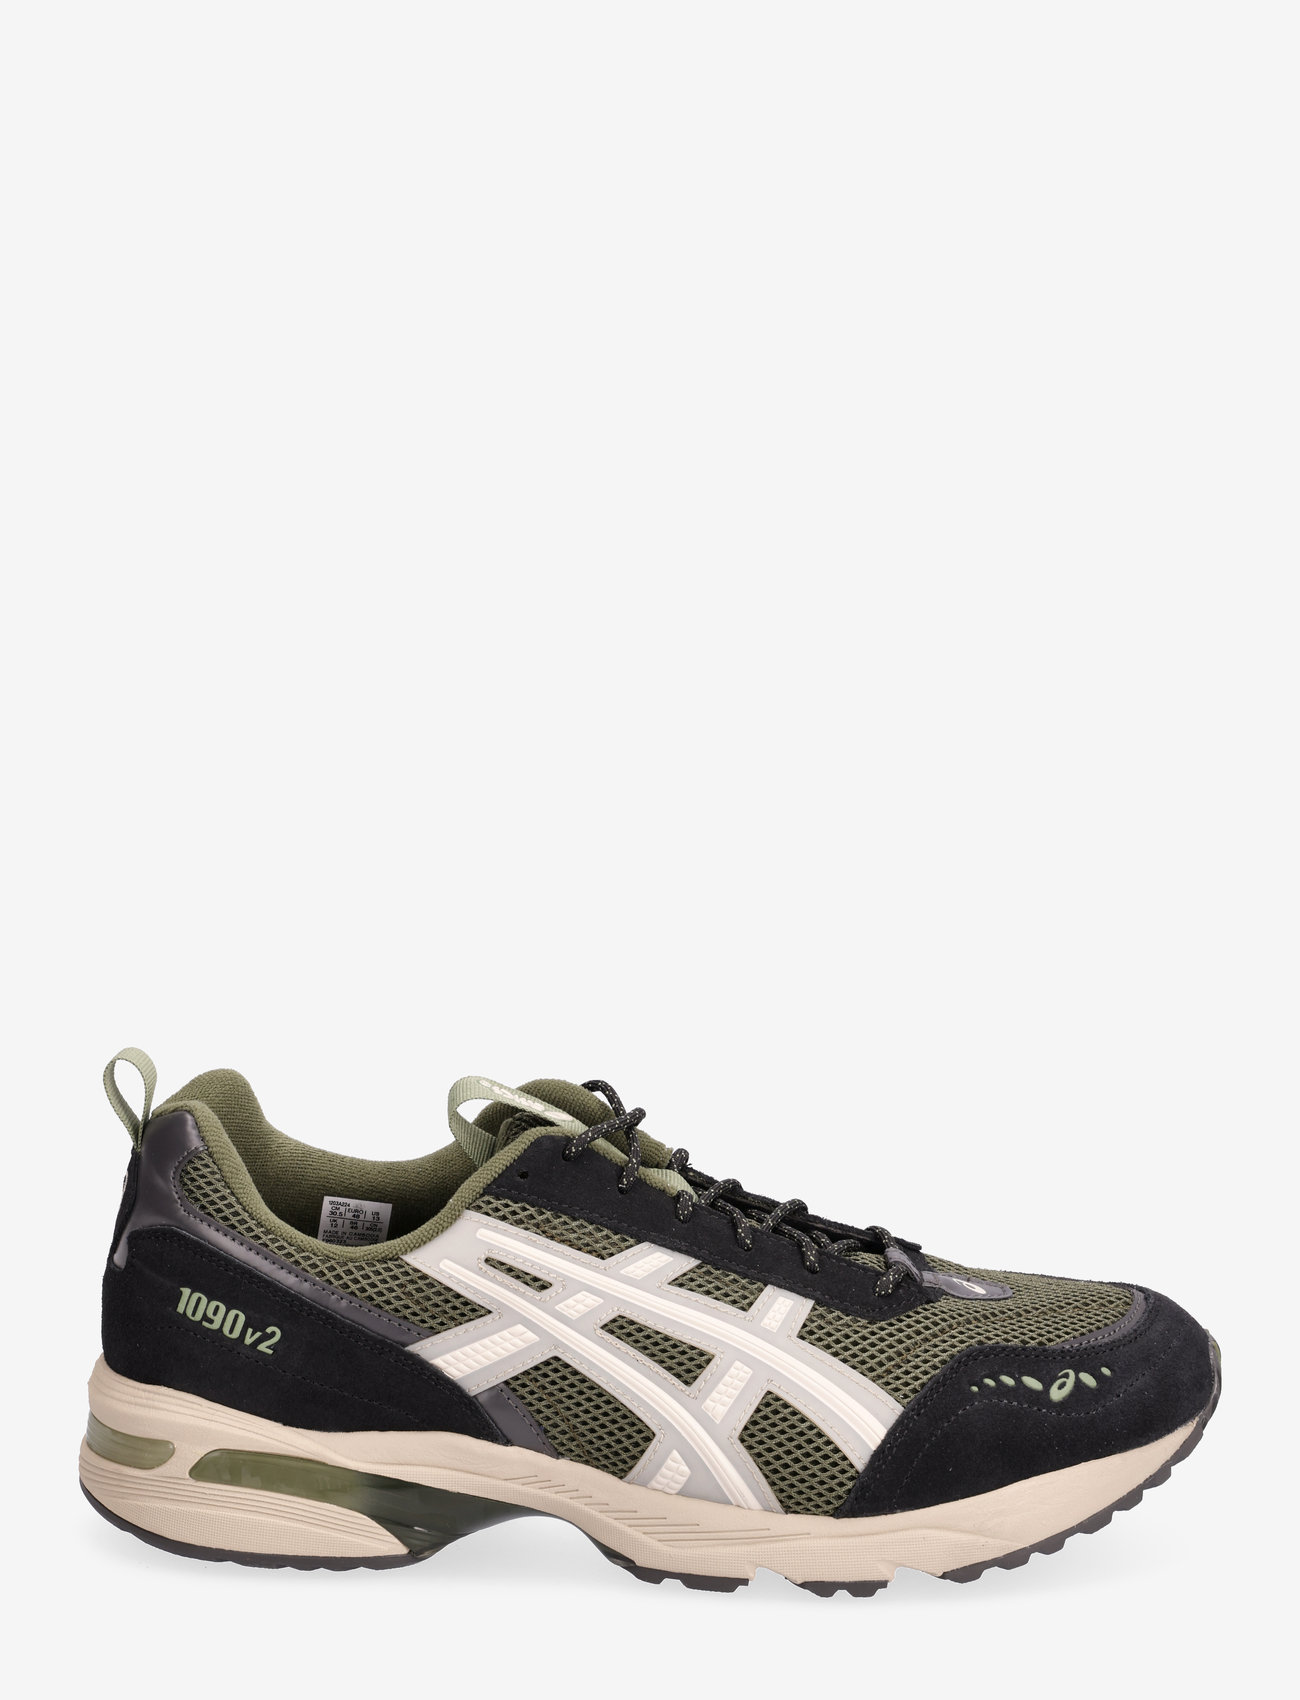 Asics - GEL-1090v2 - low top sneakers - forest/simply taupe - 1